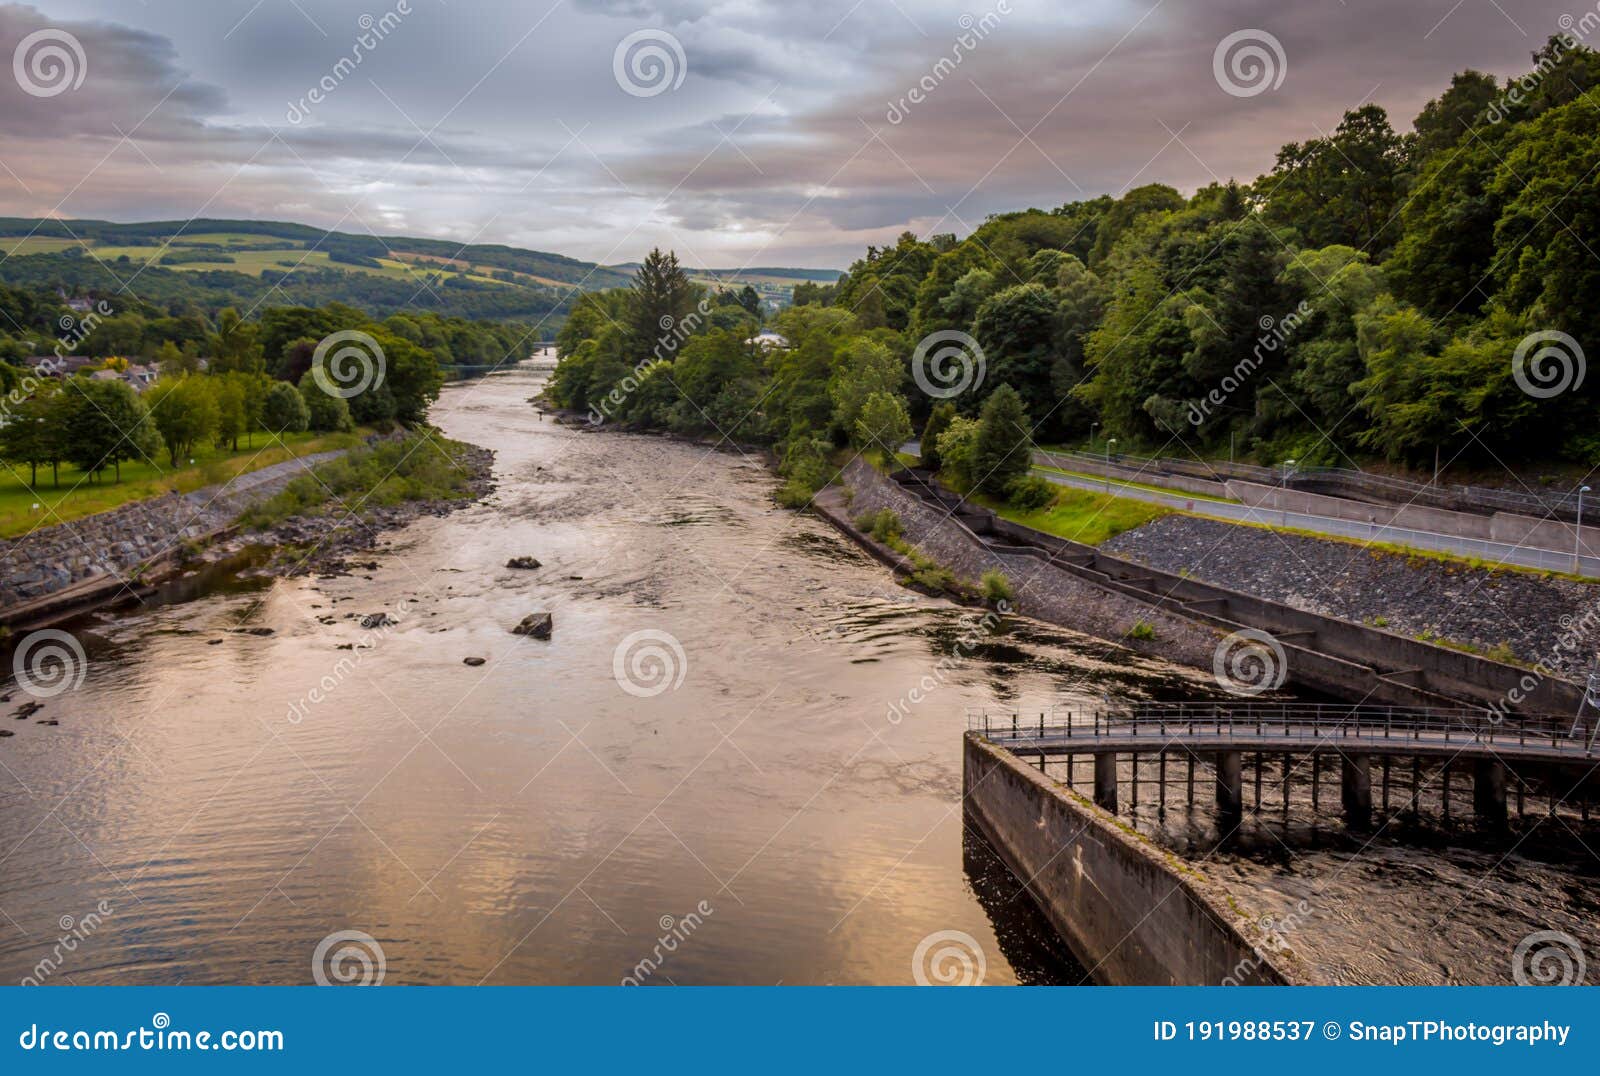 a view down the river tummel at sunset from pitlochry dam, on a cloudy evening